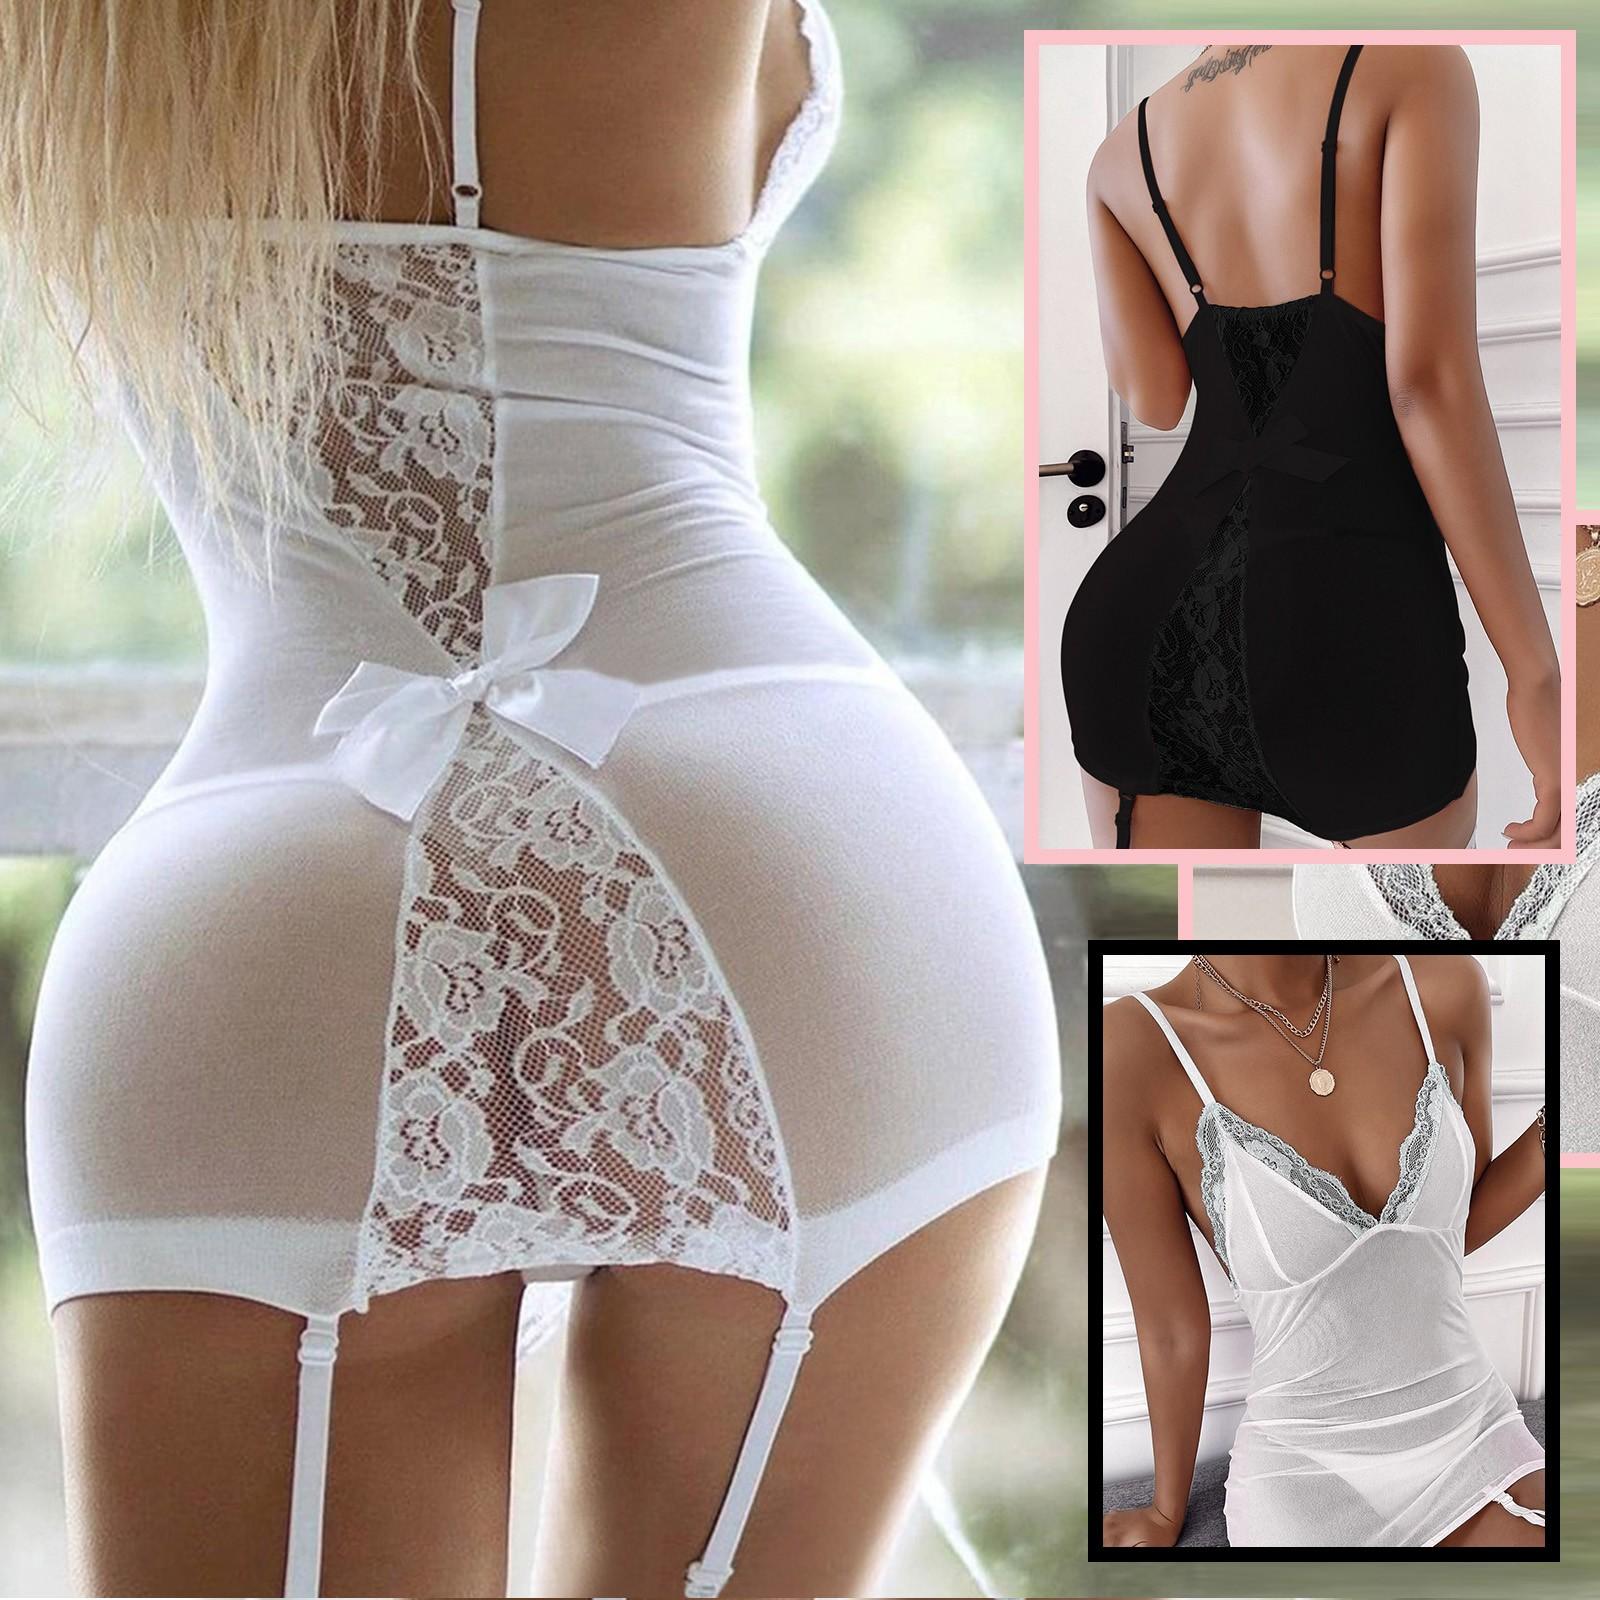 Lady cosmetic TAM Women Lace Lingerie V-Neck Bra Thong With Garter Underwear Pajamas Suit Set